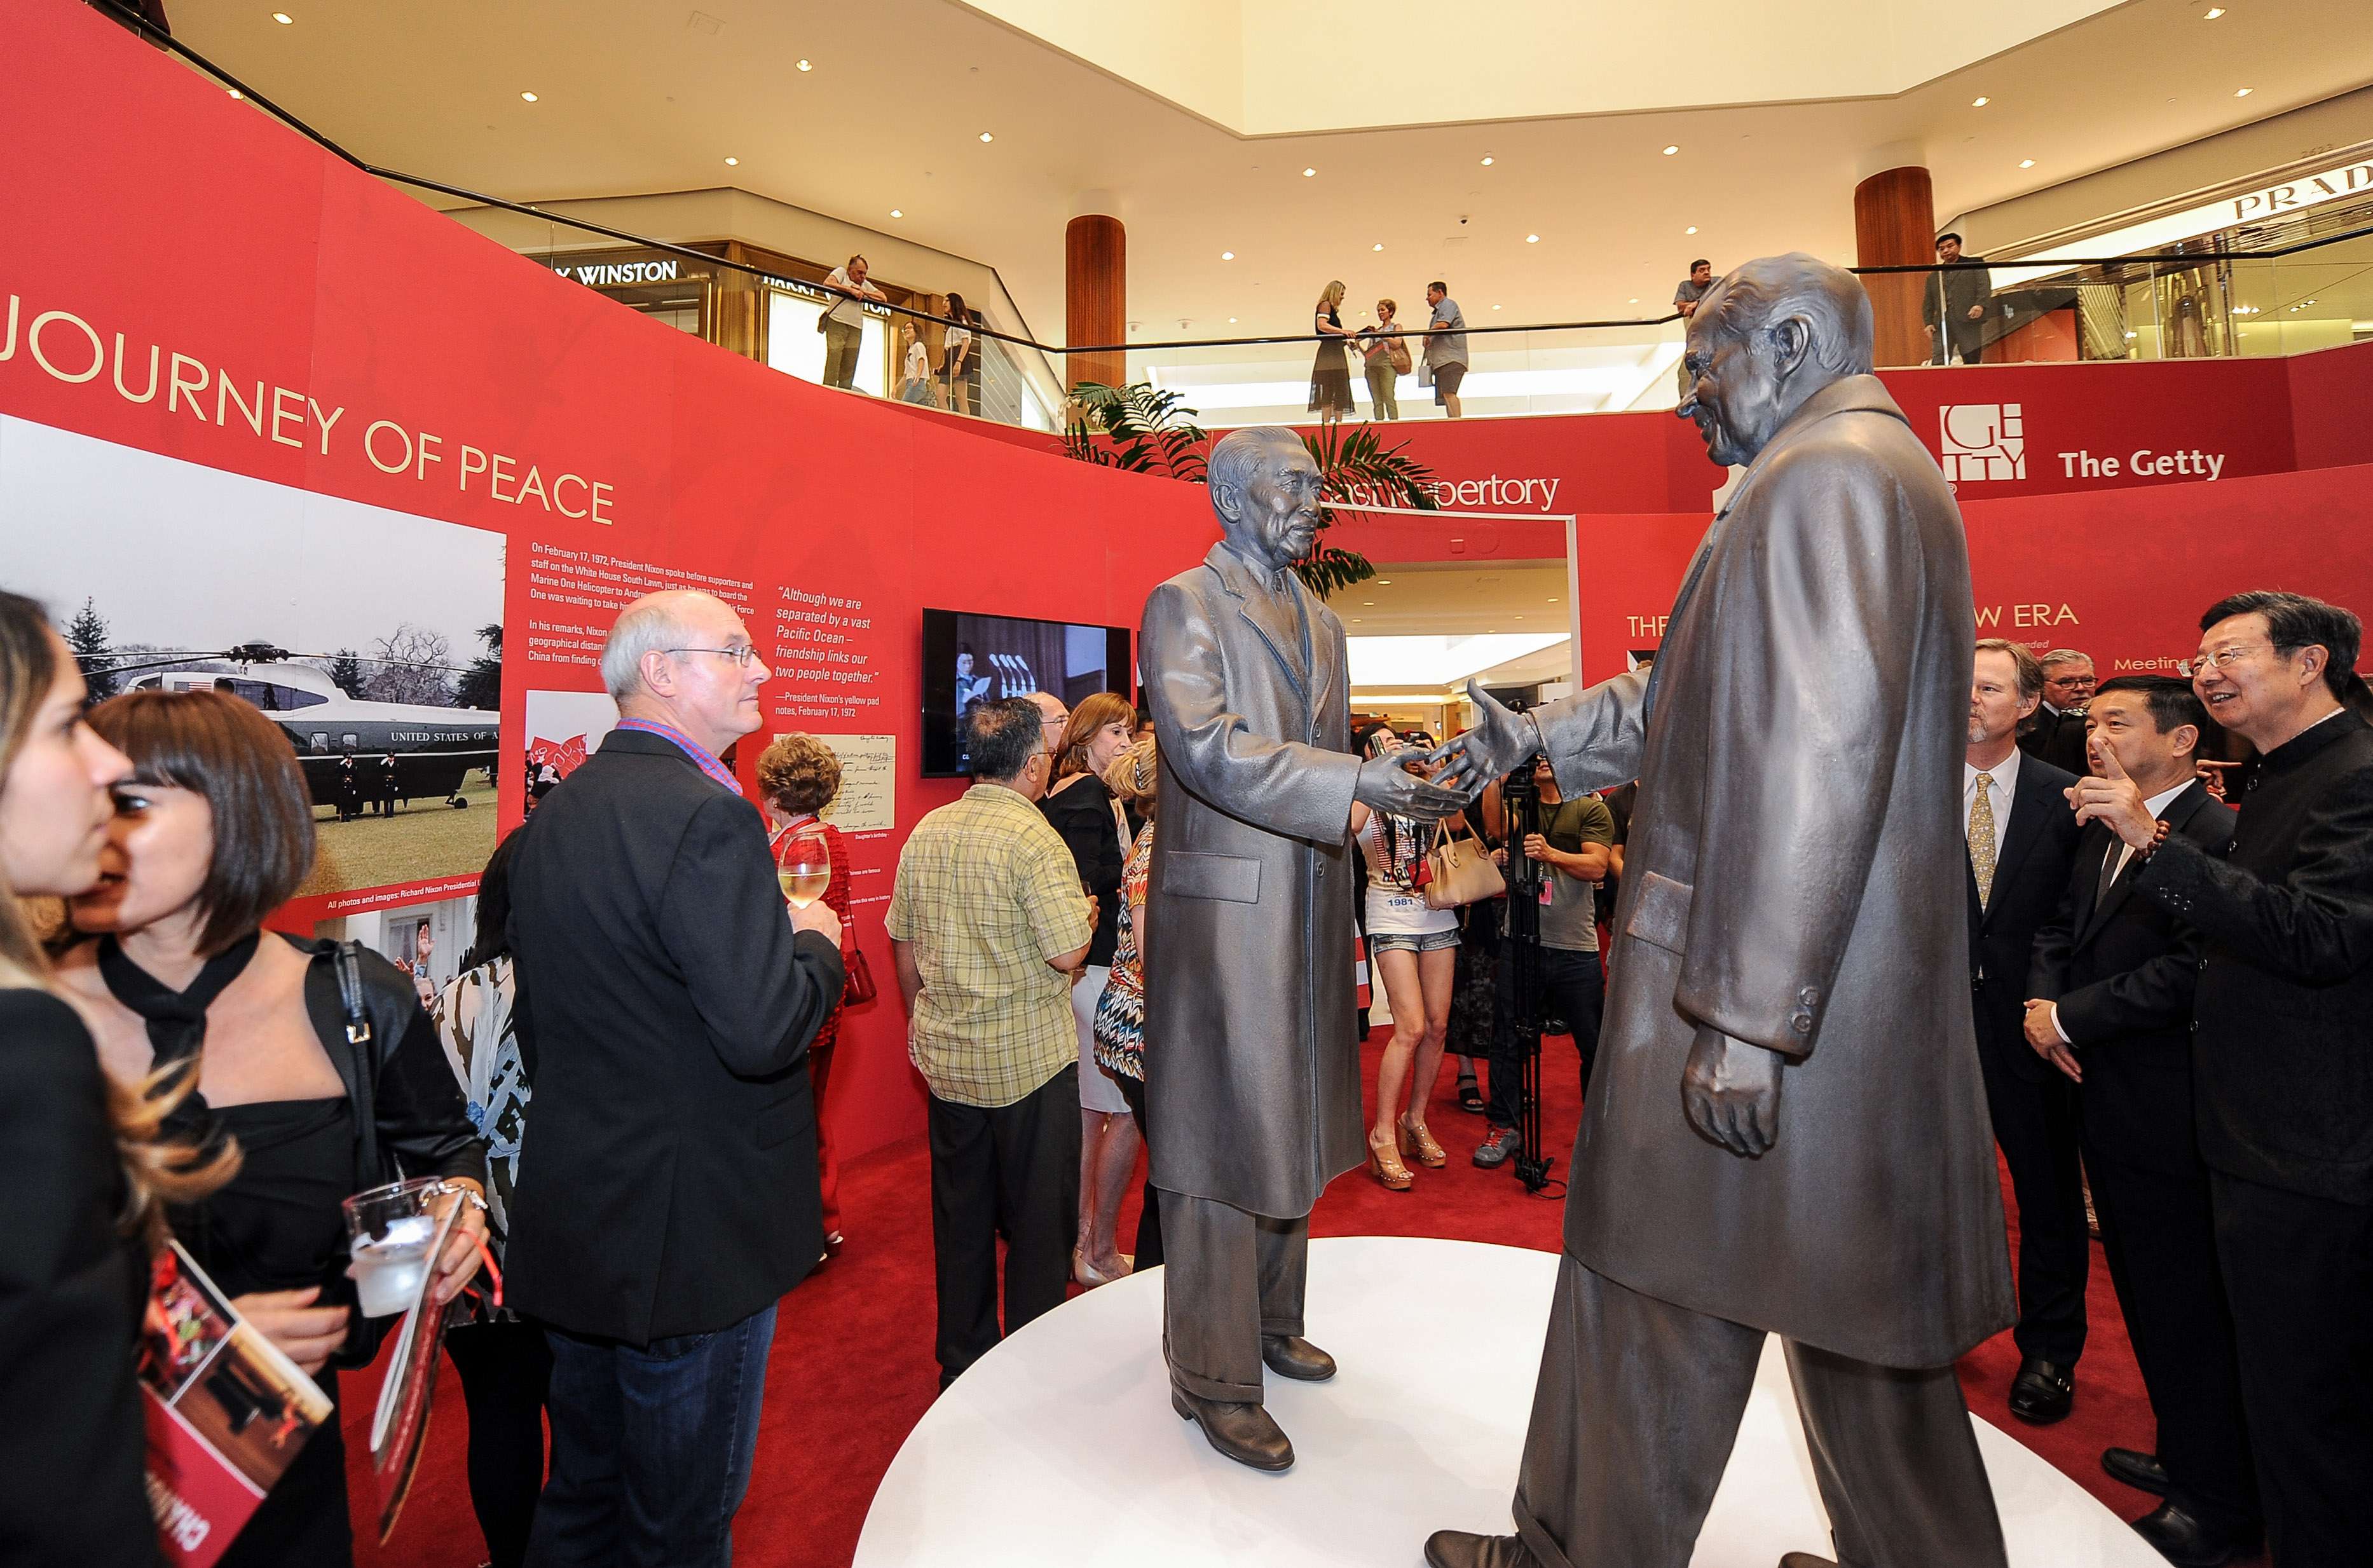 An exhibition focusing on US president Richard Nixon’s 1972 trip to China and 40 years of China-US cultural exchange opened in Costa Mesa, California, last month. Photo: Xinhua